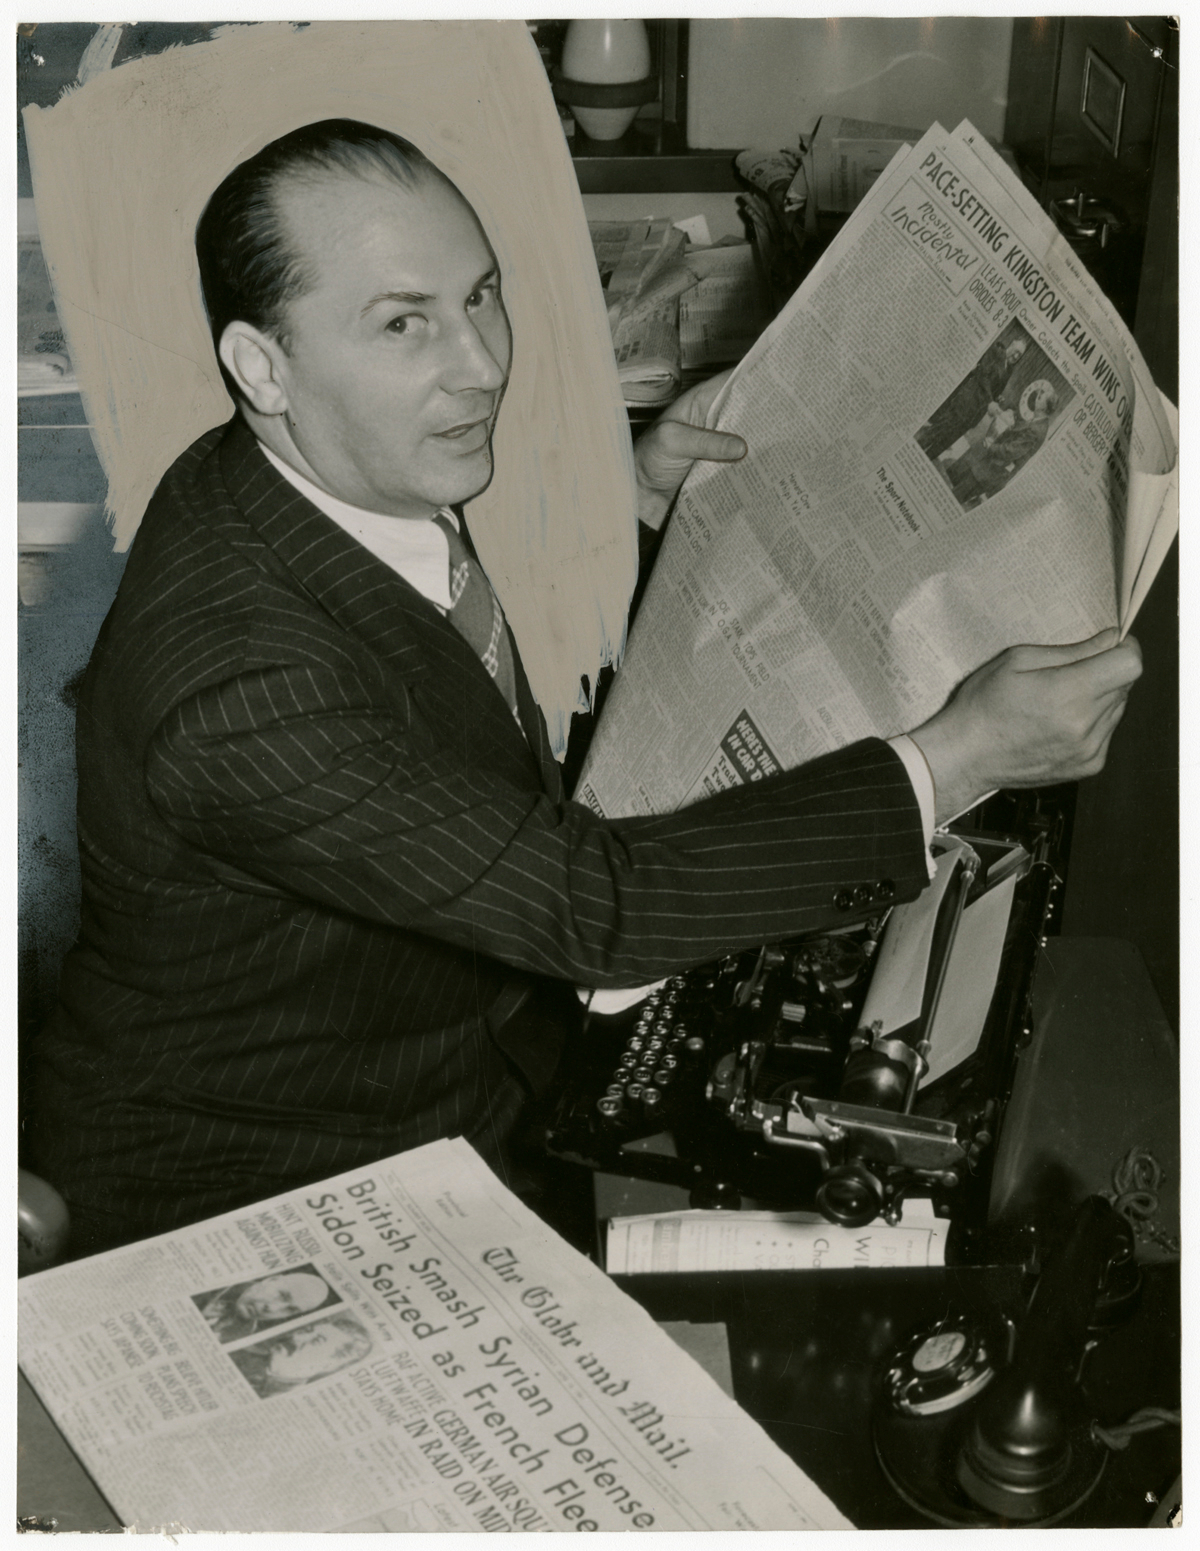     Unidentified photographer, Boxing great Benny Leonard reading The Globe and Mail sports section, c. 1945. Gelatin silver print, 9 × 6.5&#8243;. Gift of The Globe and Mail newspaper to the Canadian Photography Institute of the National Gallery of Canada.

